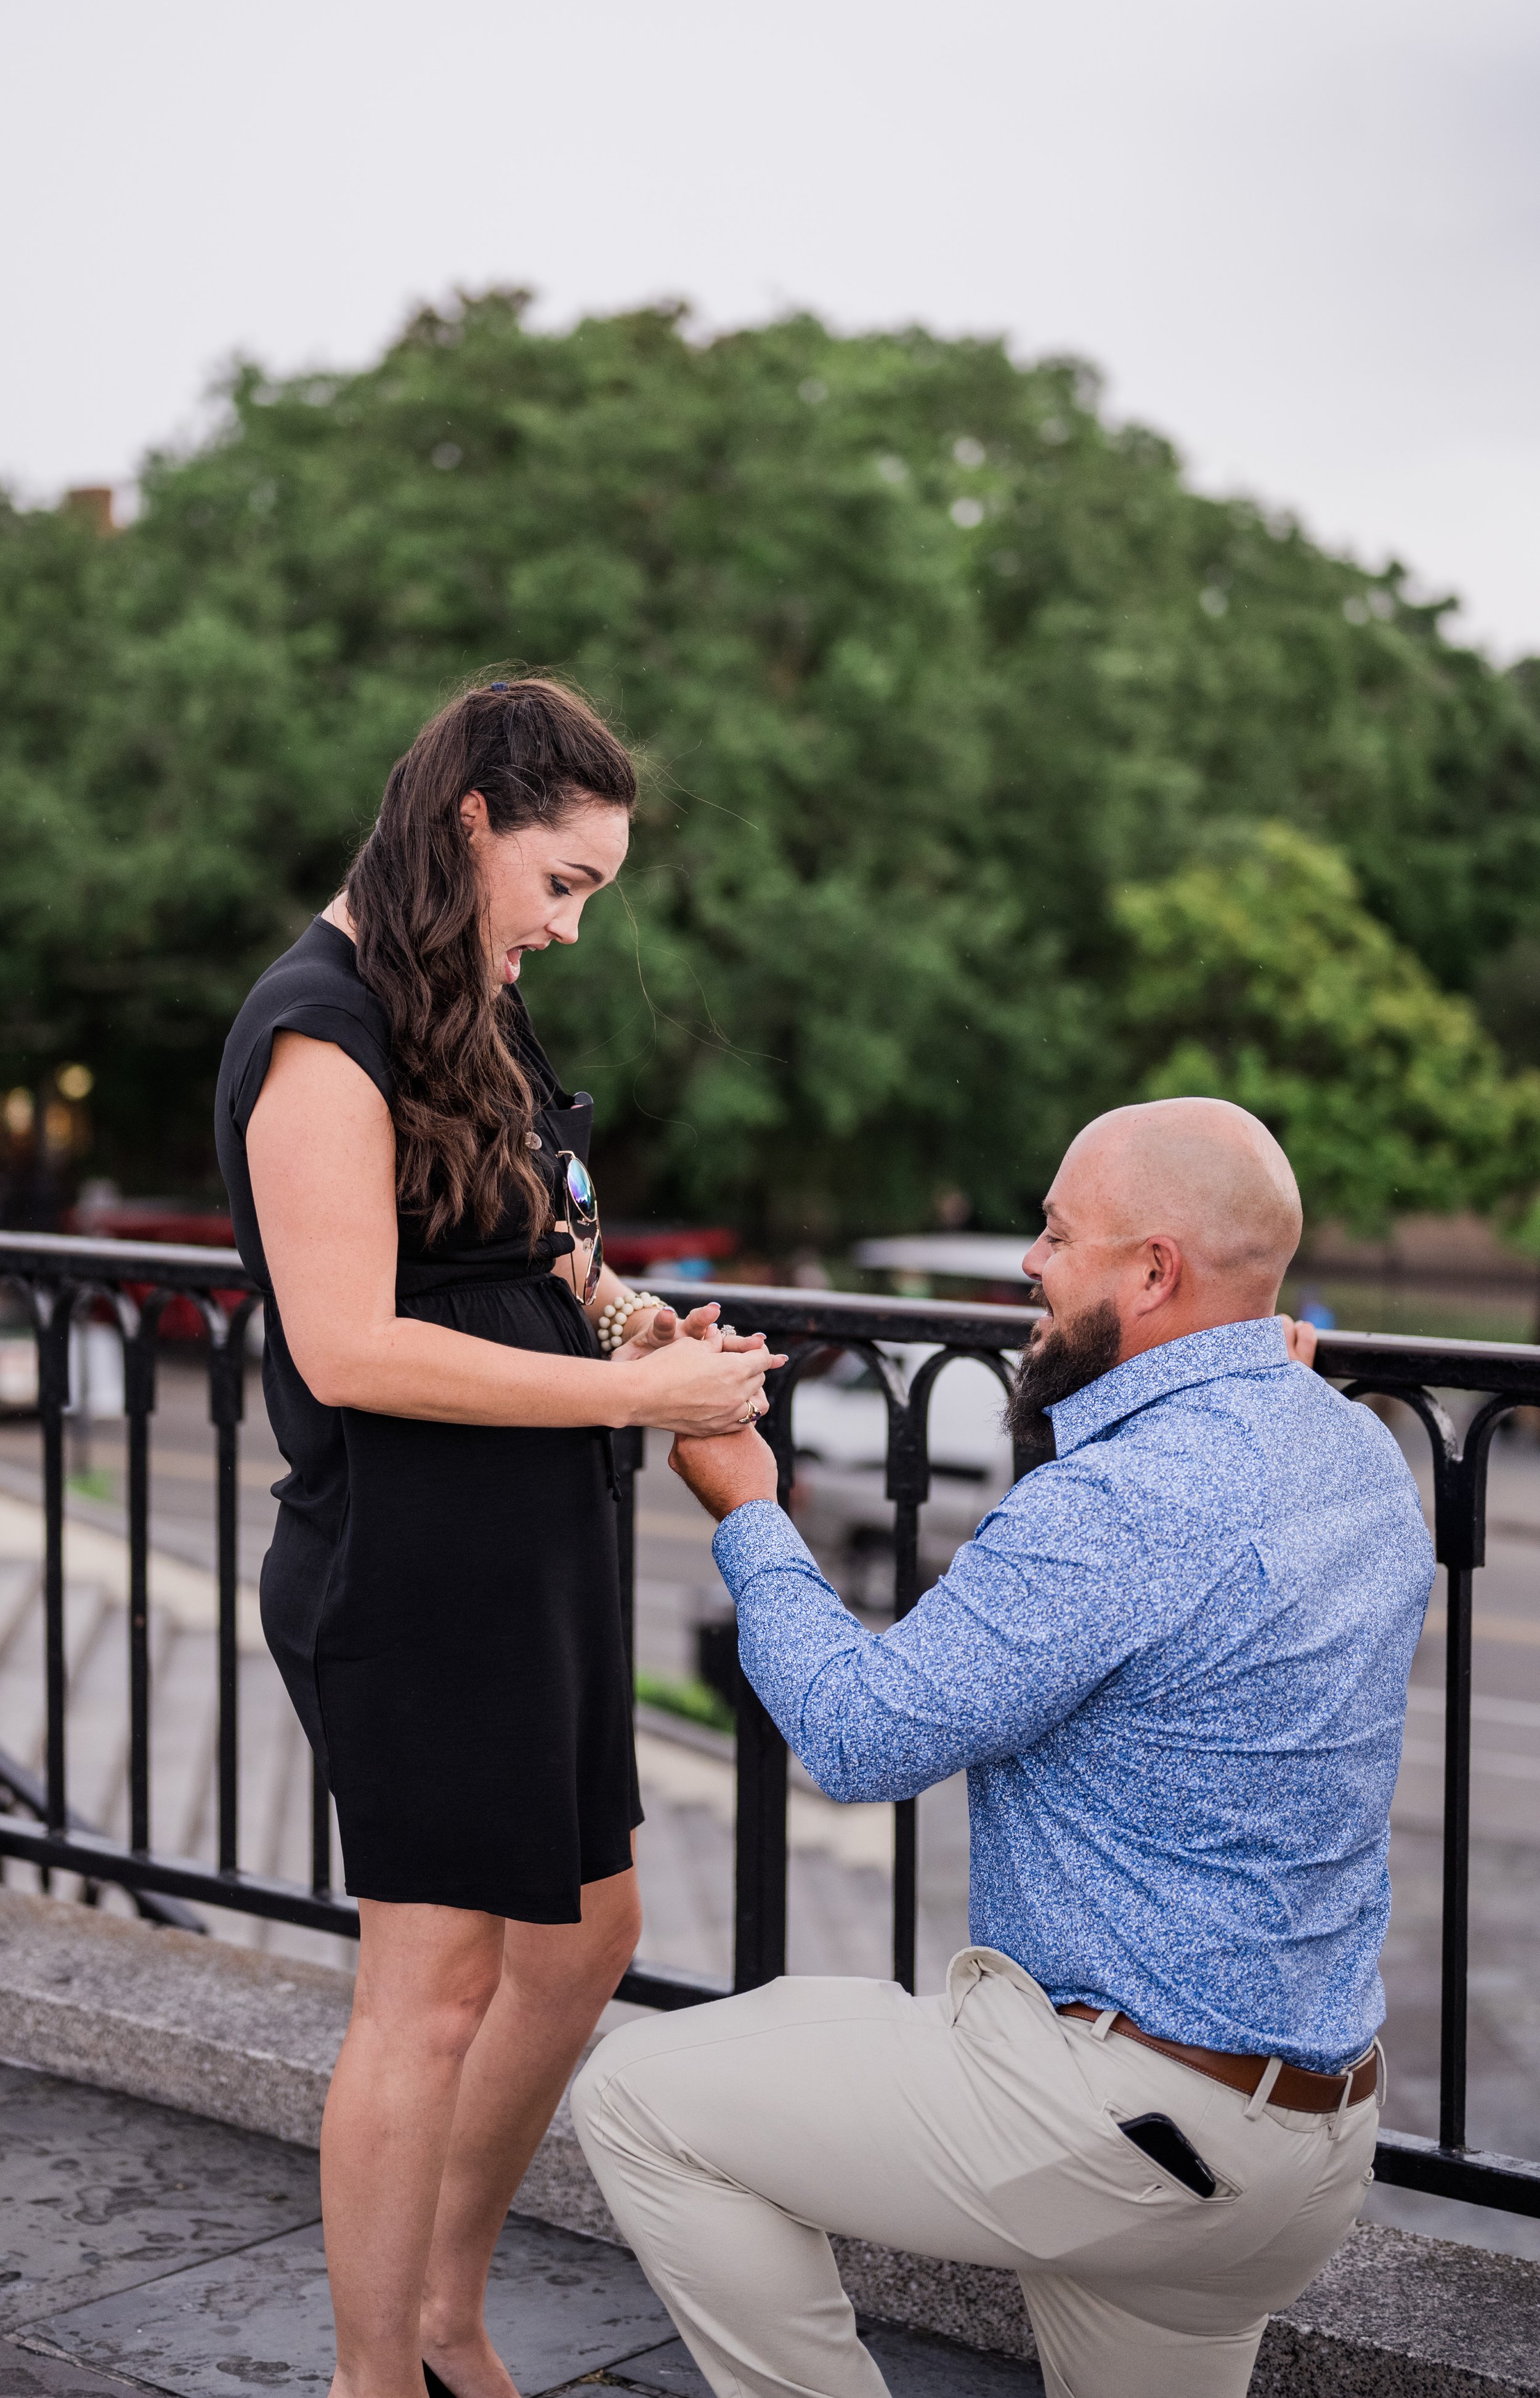  Jim proposes to his long time girlfriend, Amanda, overlooking Jackson Square 